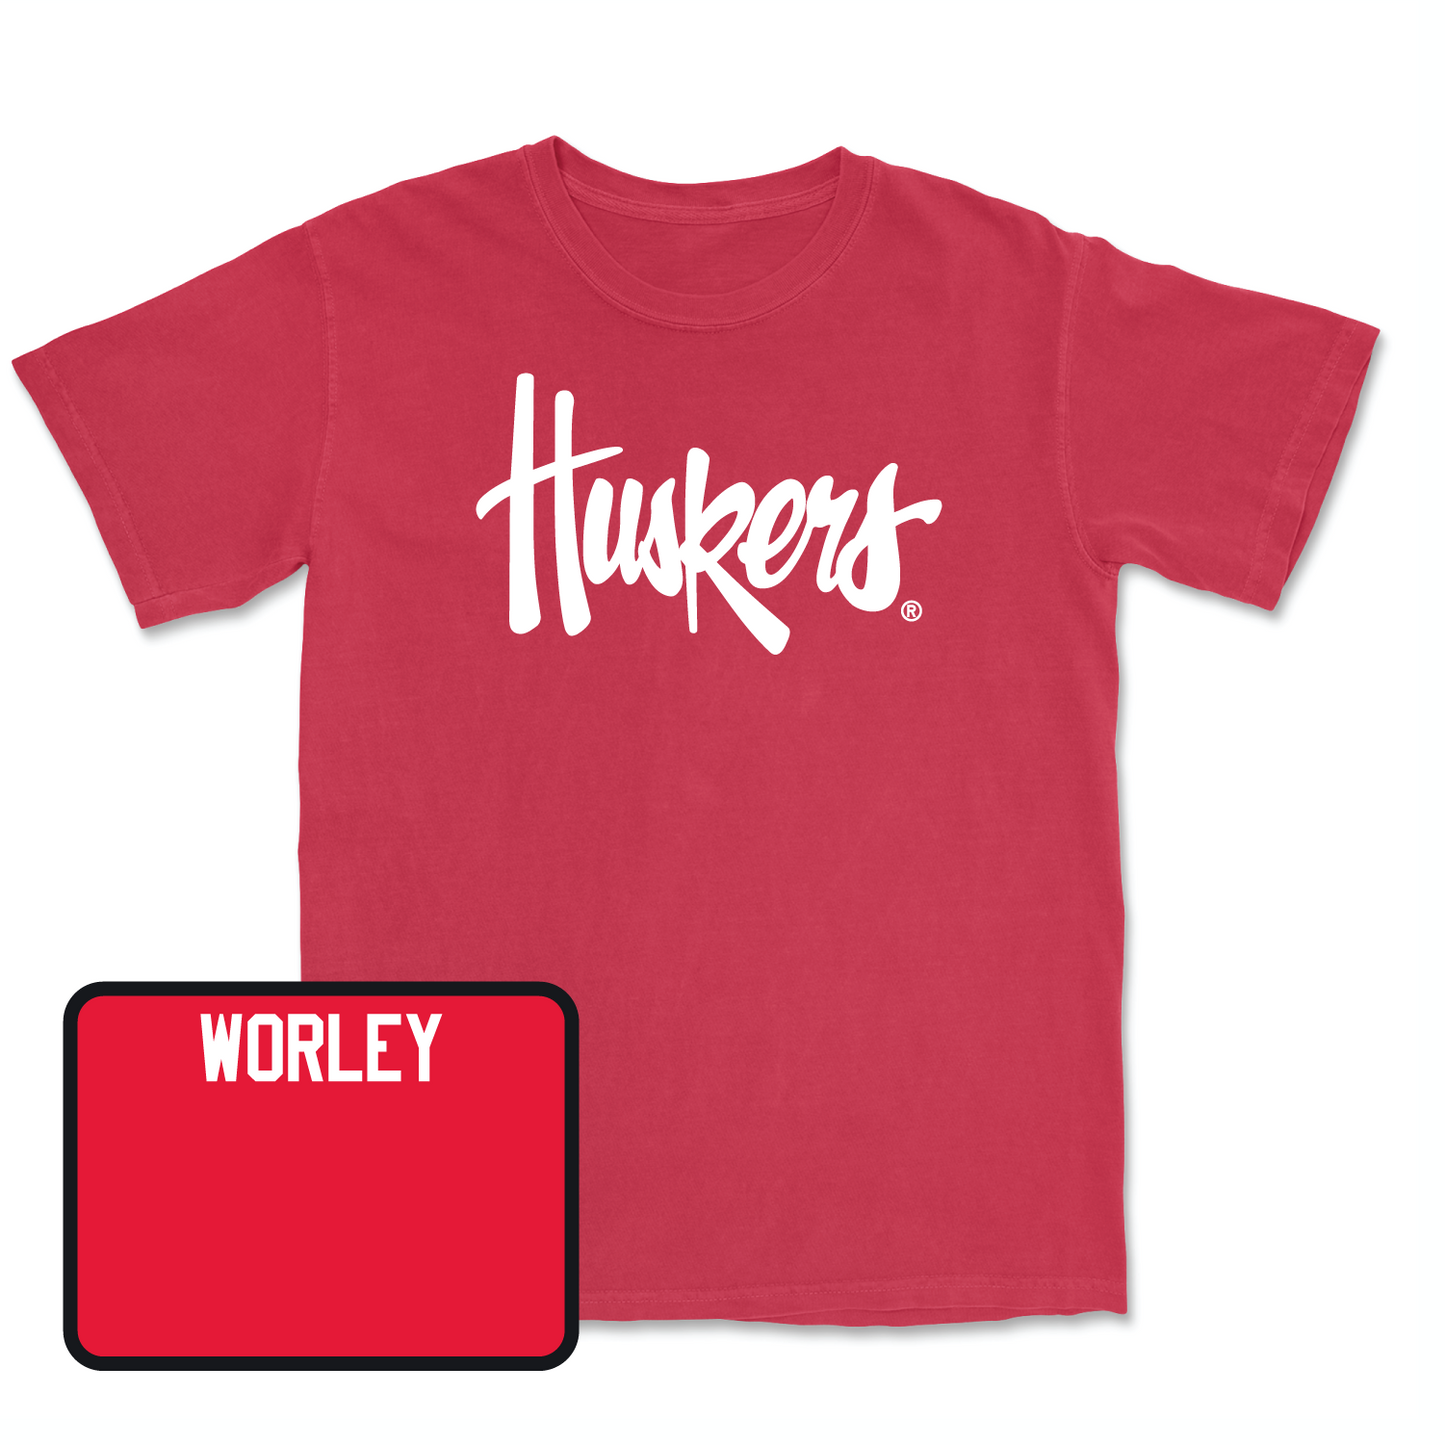 Red Women's Gymnastics Huskers Tee X-Large / Annie Worley